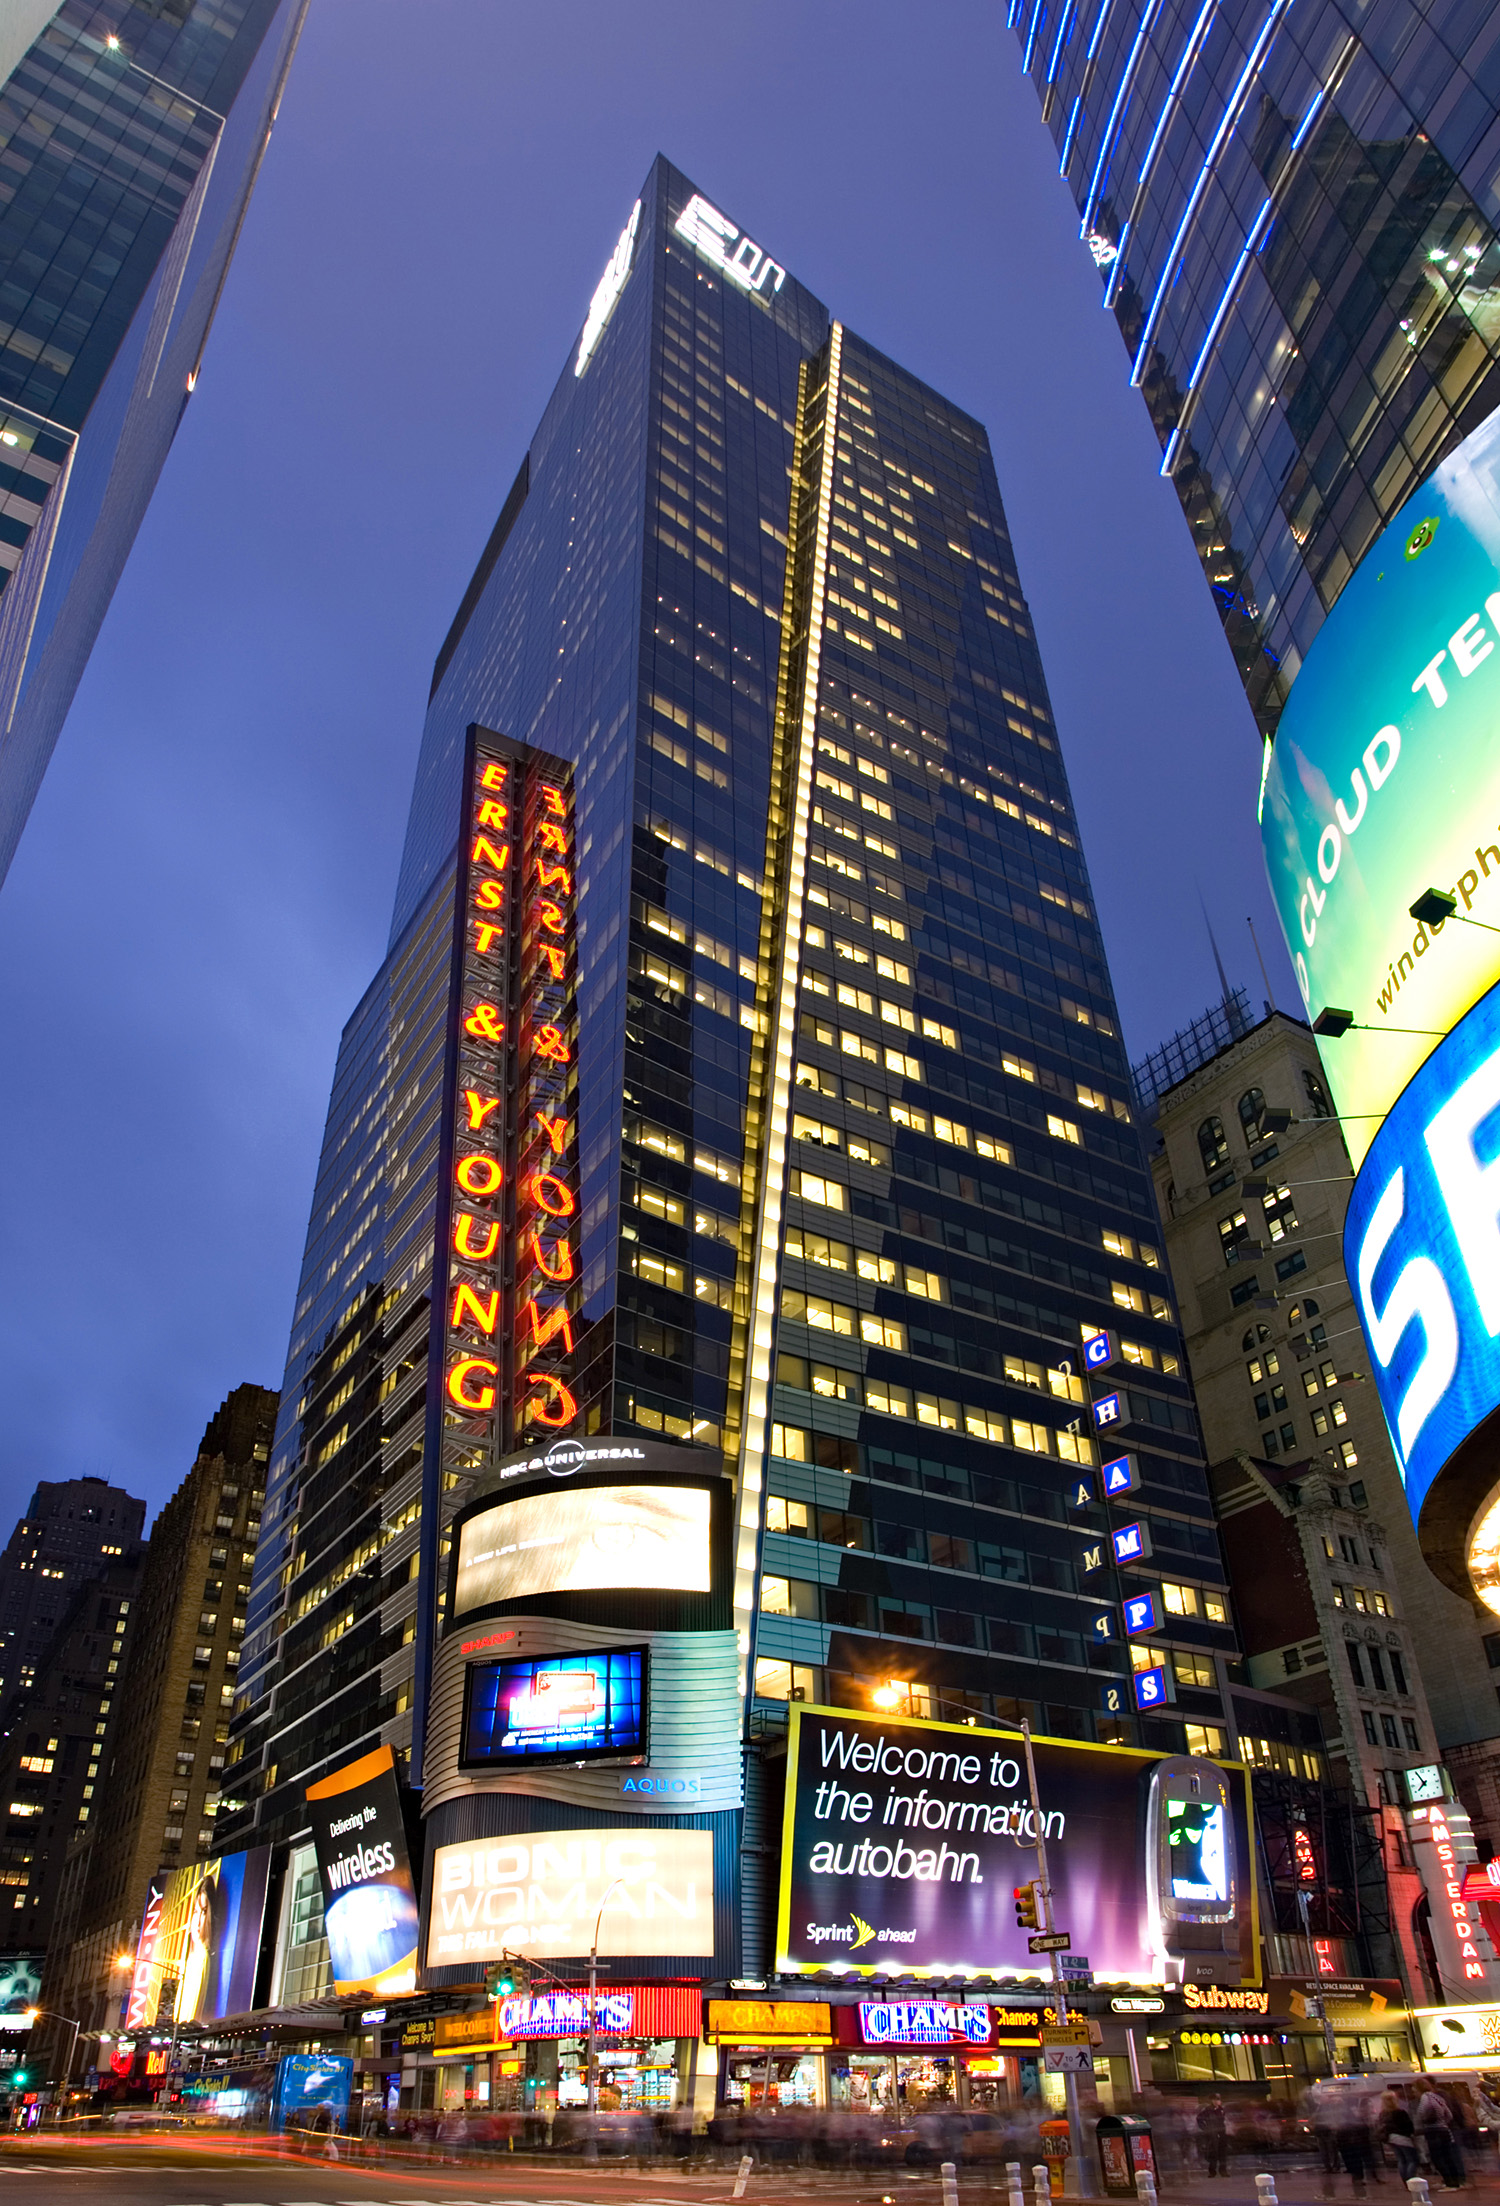 Ernst & Young Tower, New York City - Illegal shot with tripod on Times Square :-). © Mathias Beinling